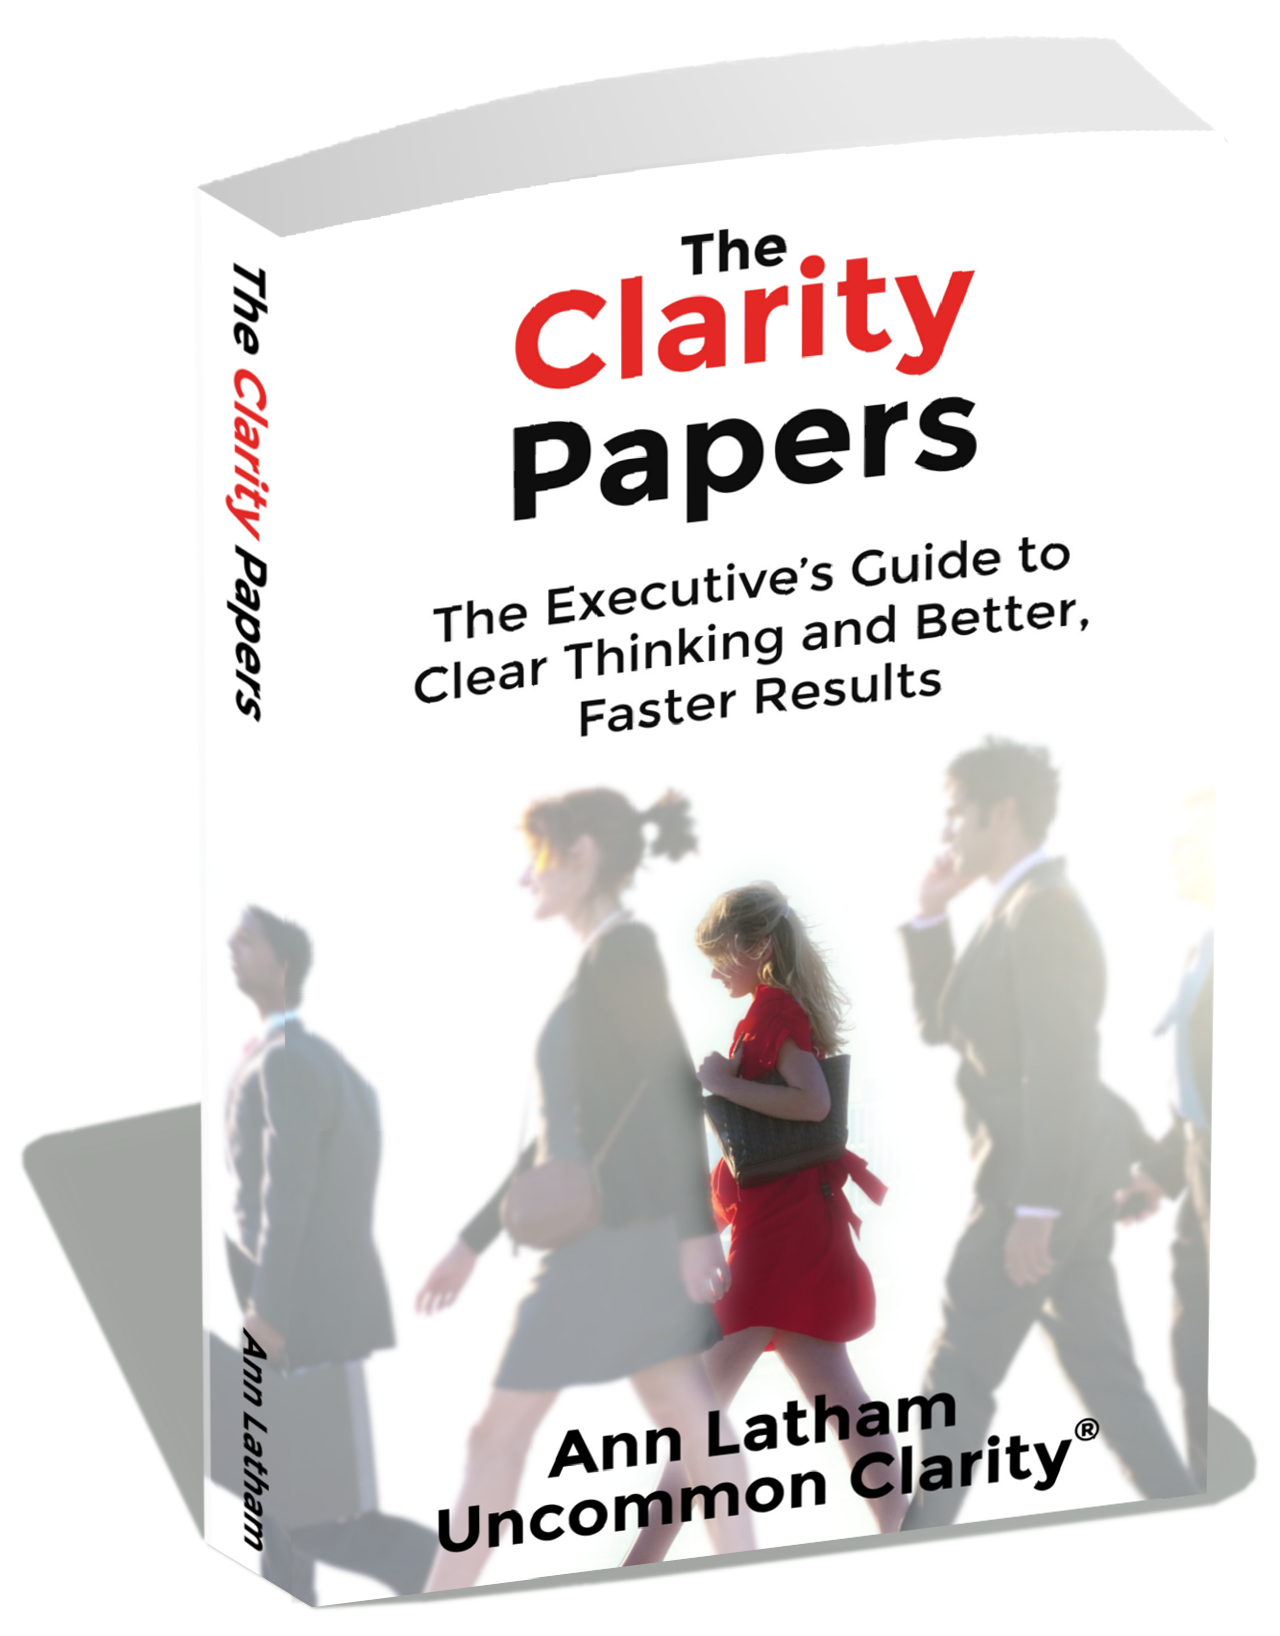 The Clarity Papers by Ann Latham